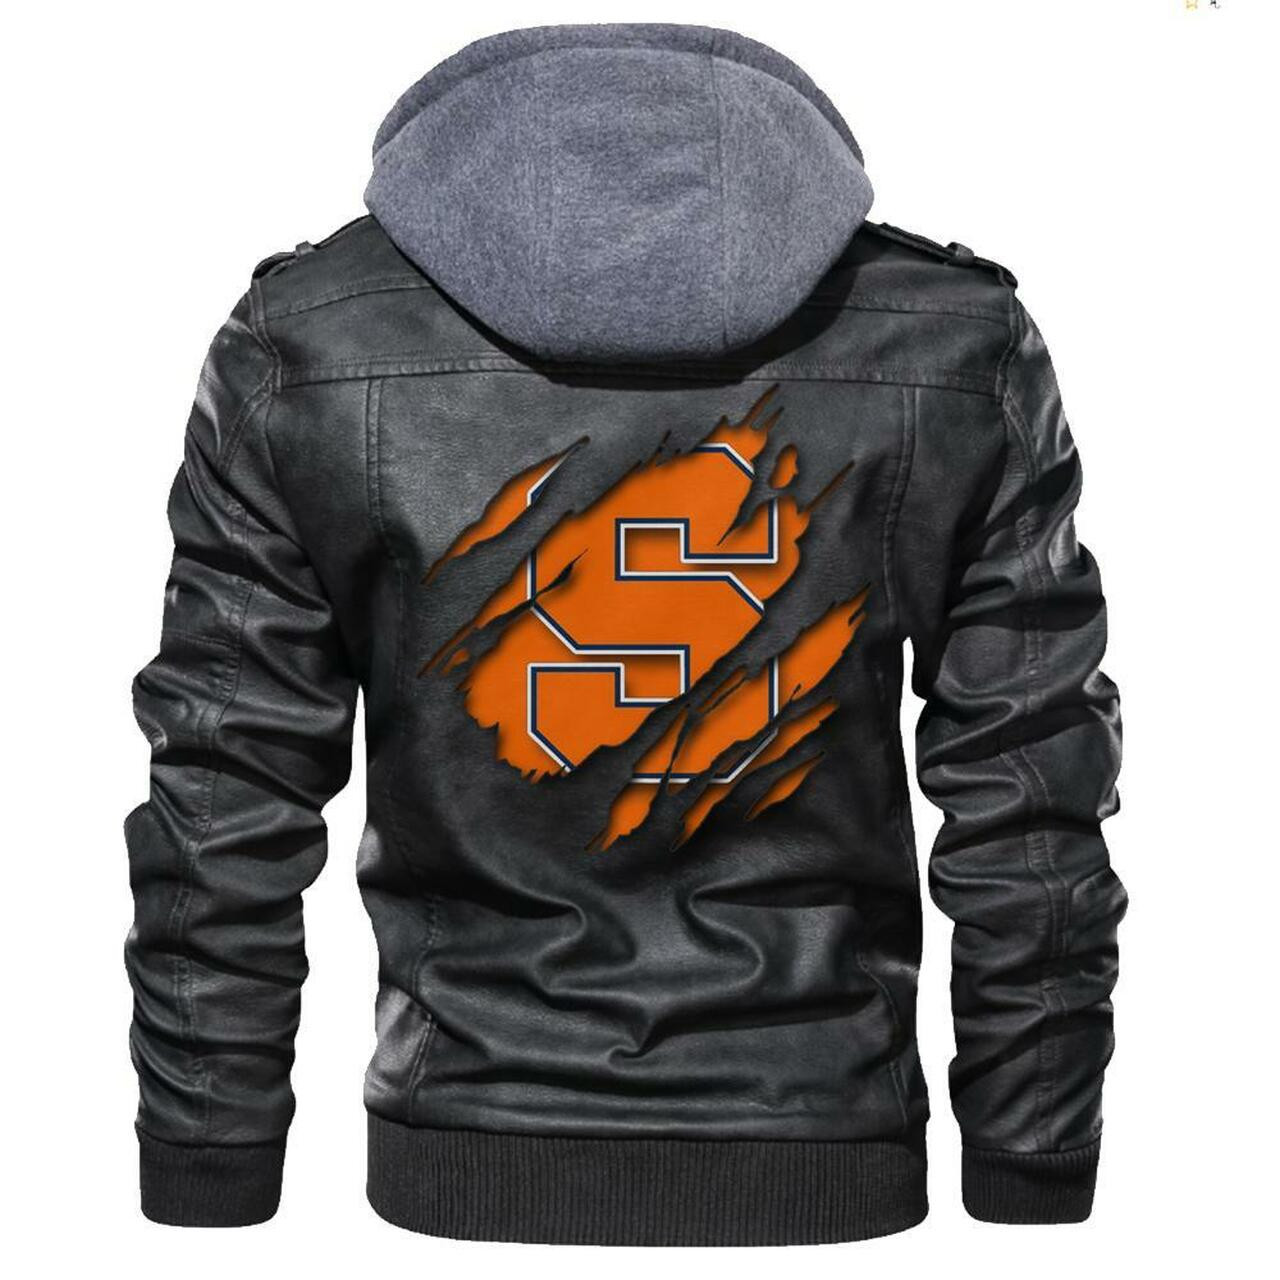 To get a great look, consider purchasing This New Leather Jacket 113